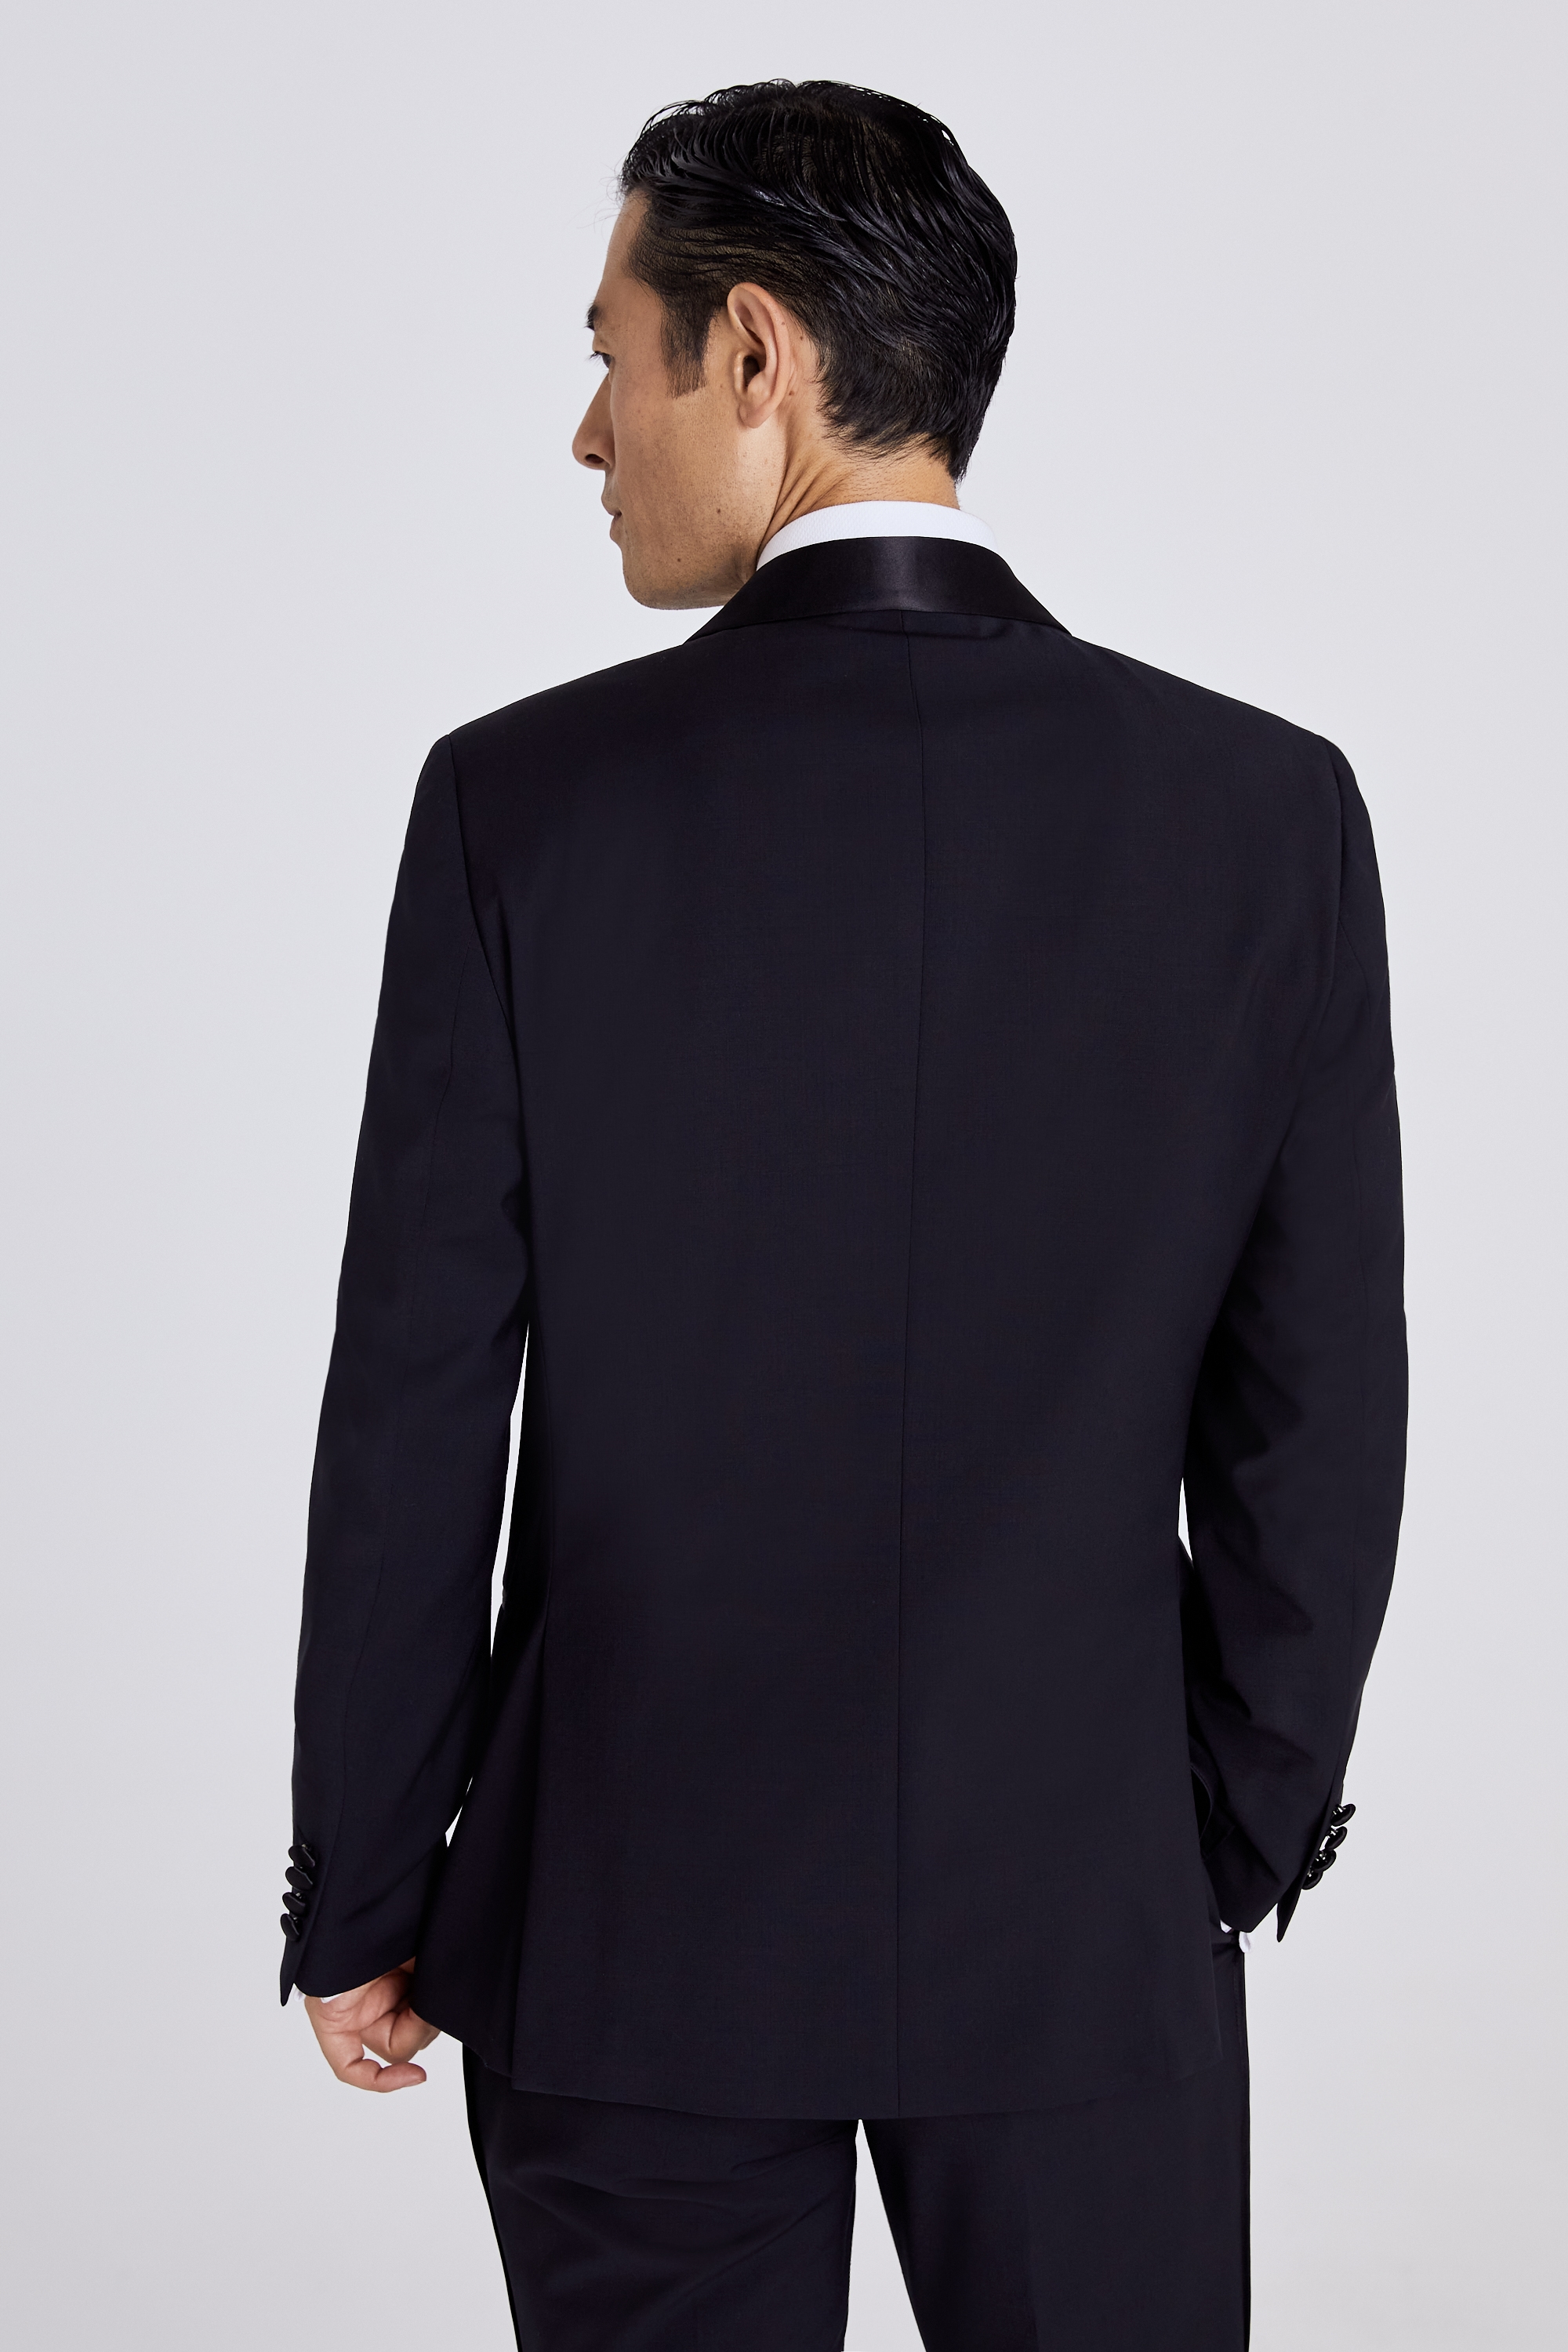 Tailored Fit Black Shawl Lapel Tuxedo Jacket | Buy Online at Moss